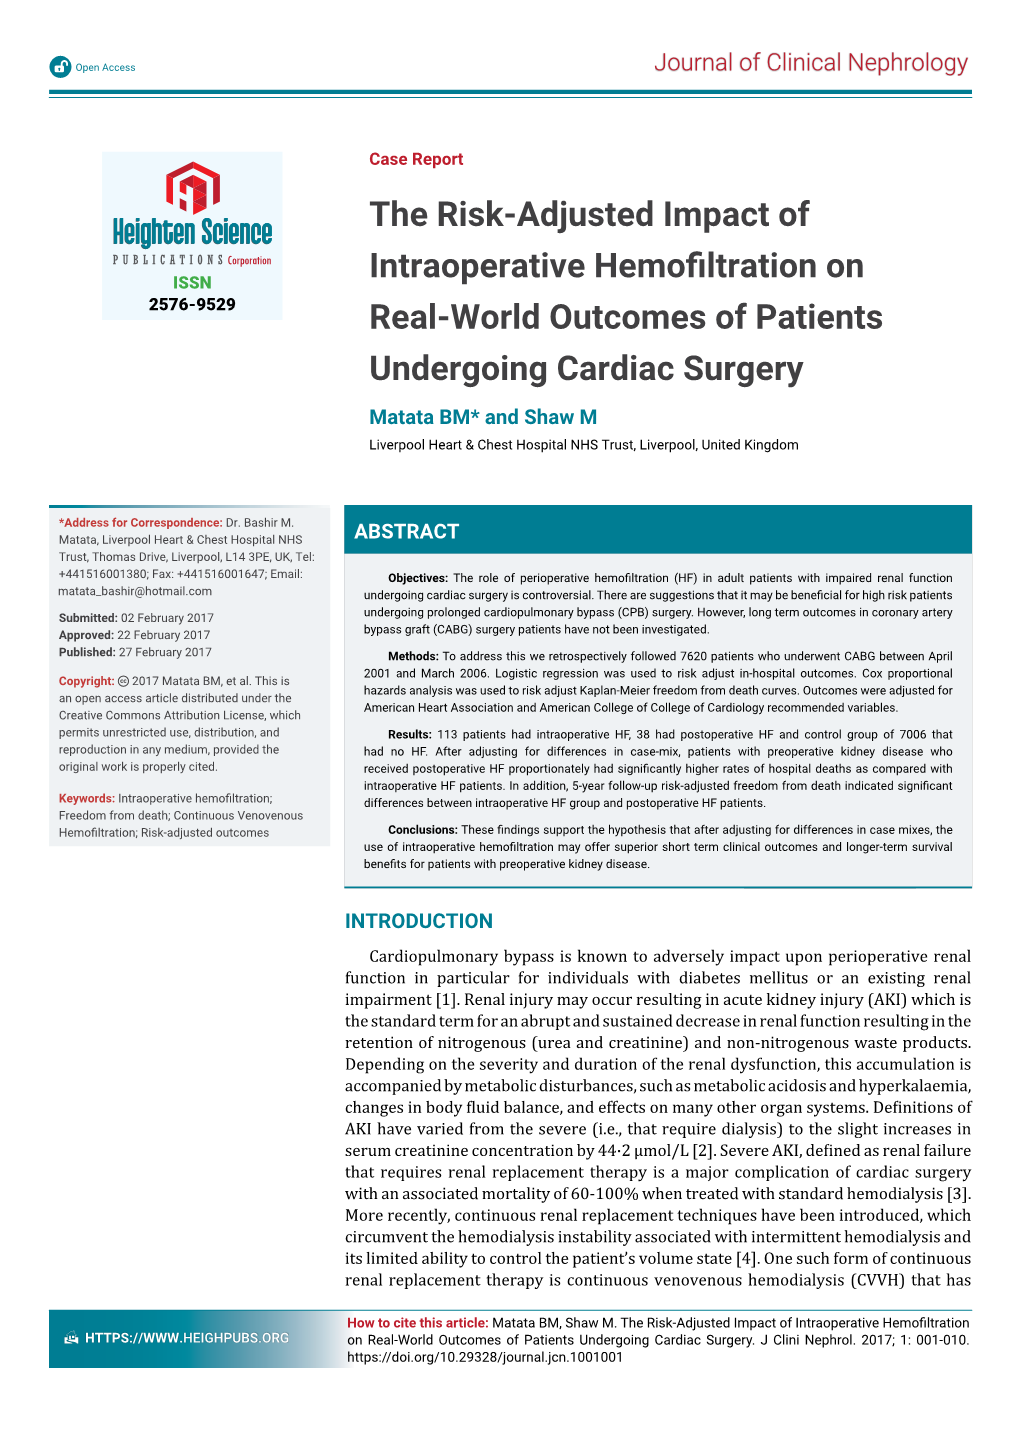 The Risk-Adjusted Impact of Intraoperative Hemofiltration On